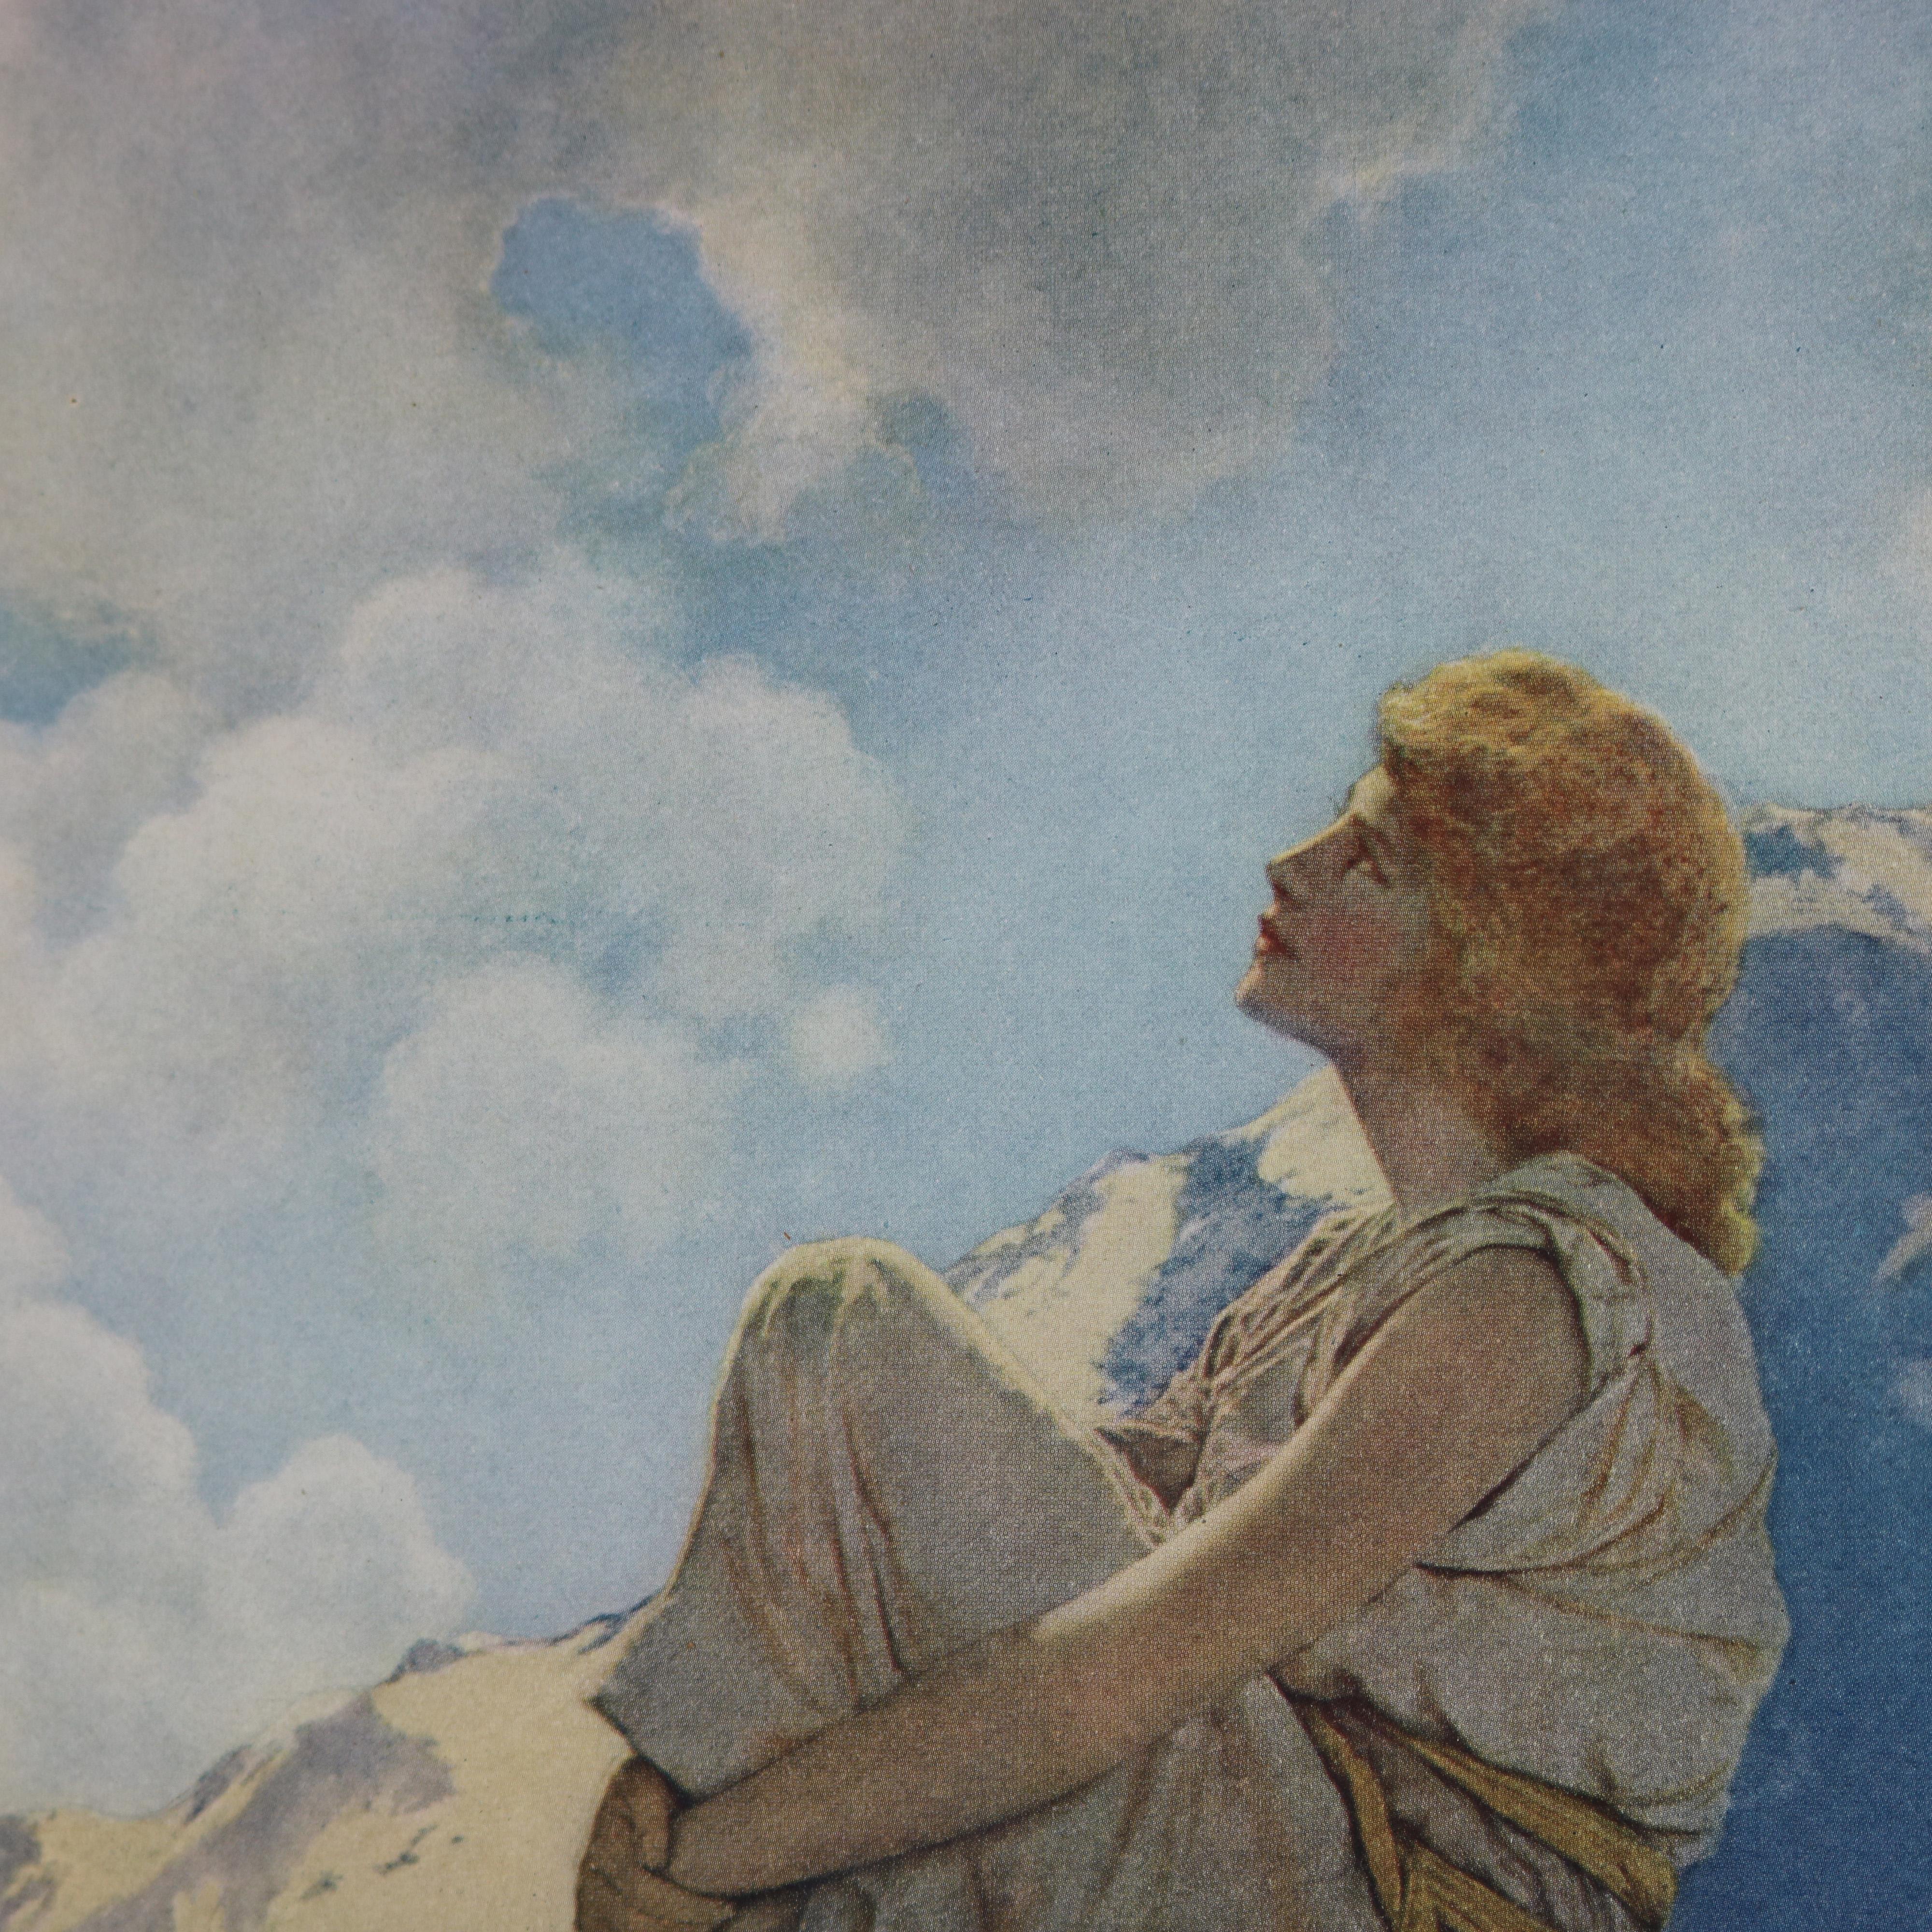 American Art Deco Antique Print 'Morning' After Original by Maxfield Parrish, Framed